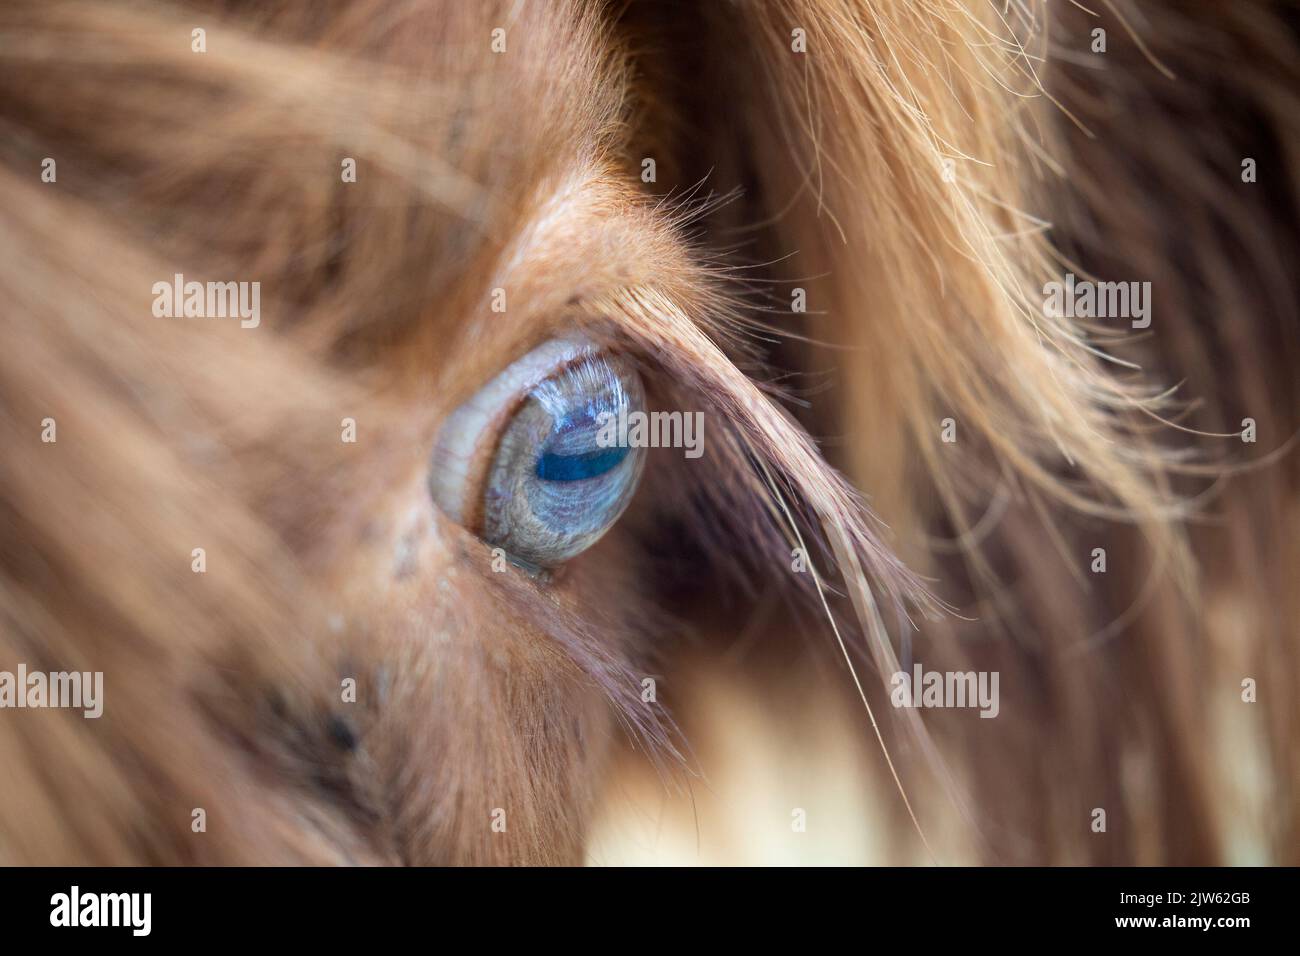 Highland cow with unusual blue eye close up Stock Photo